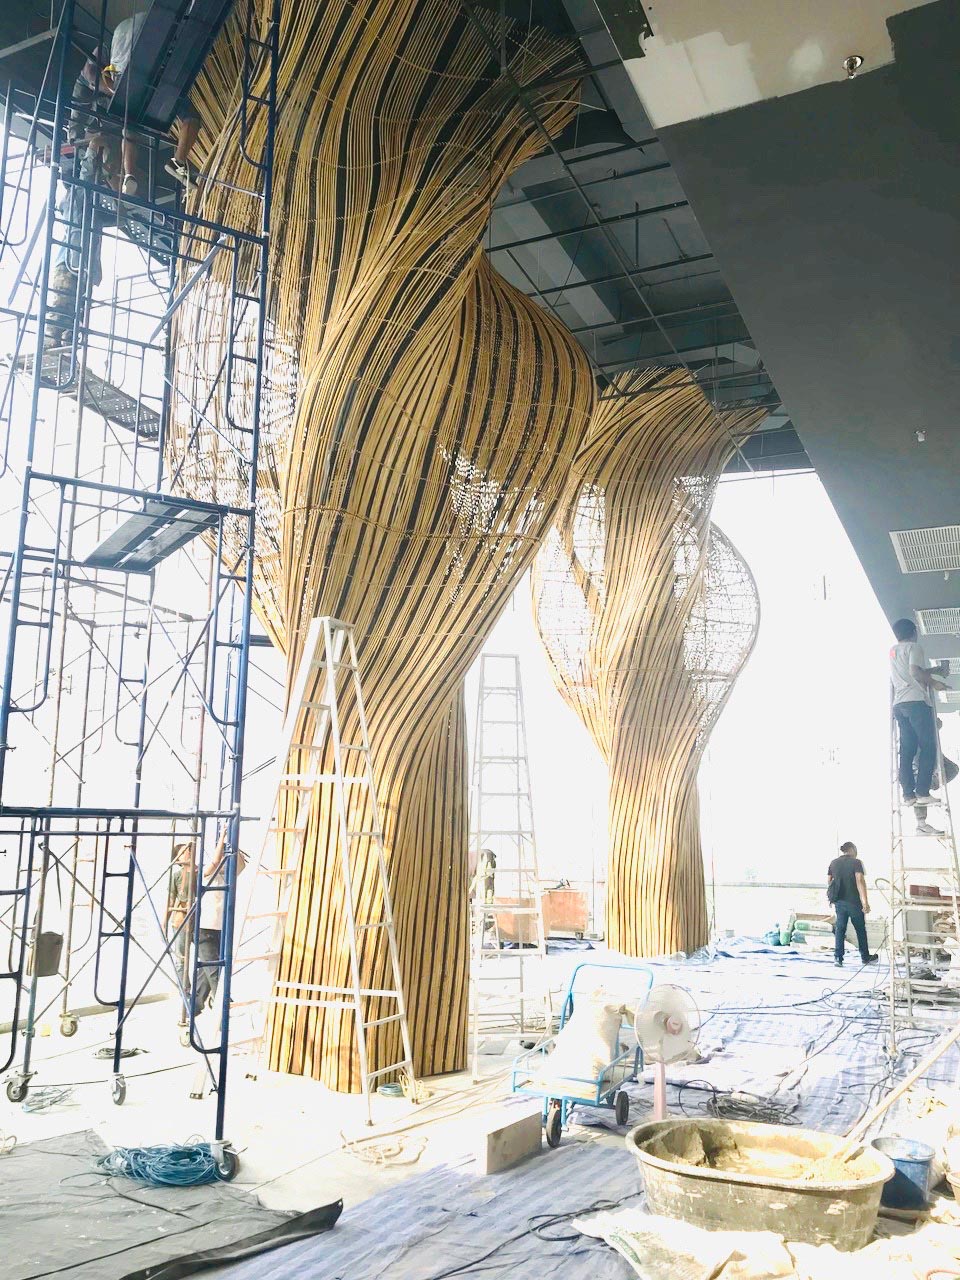 MAKING OF - A modern restaurant with a glass facade that showcases flowing rattan sculptures inside.